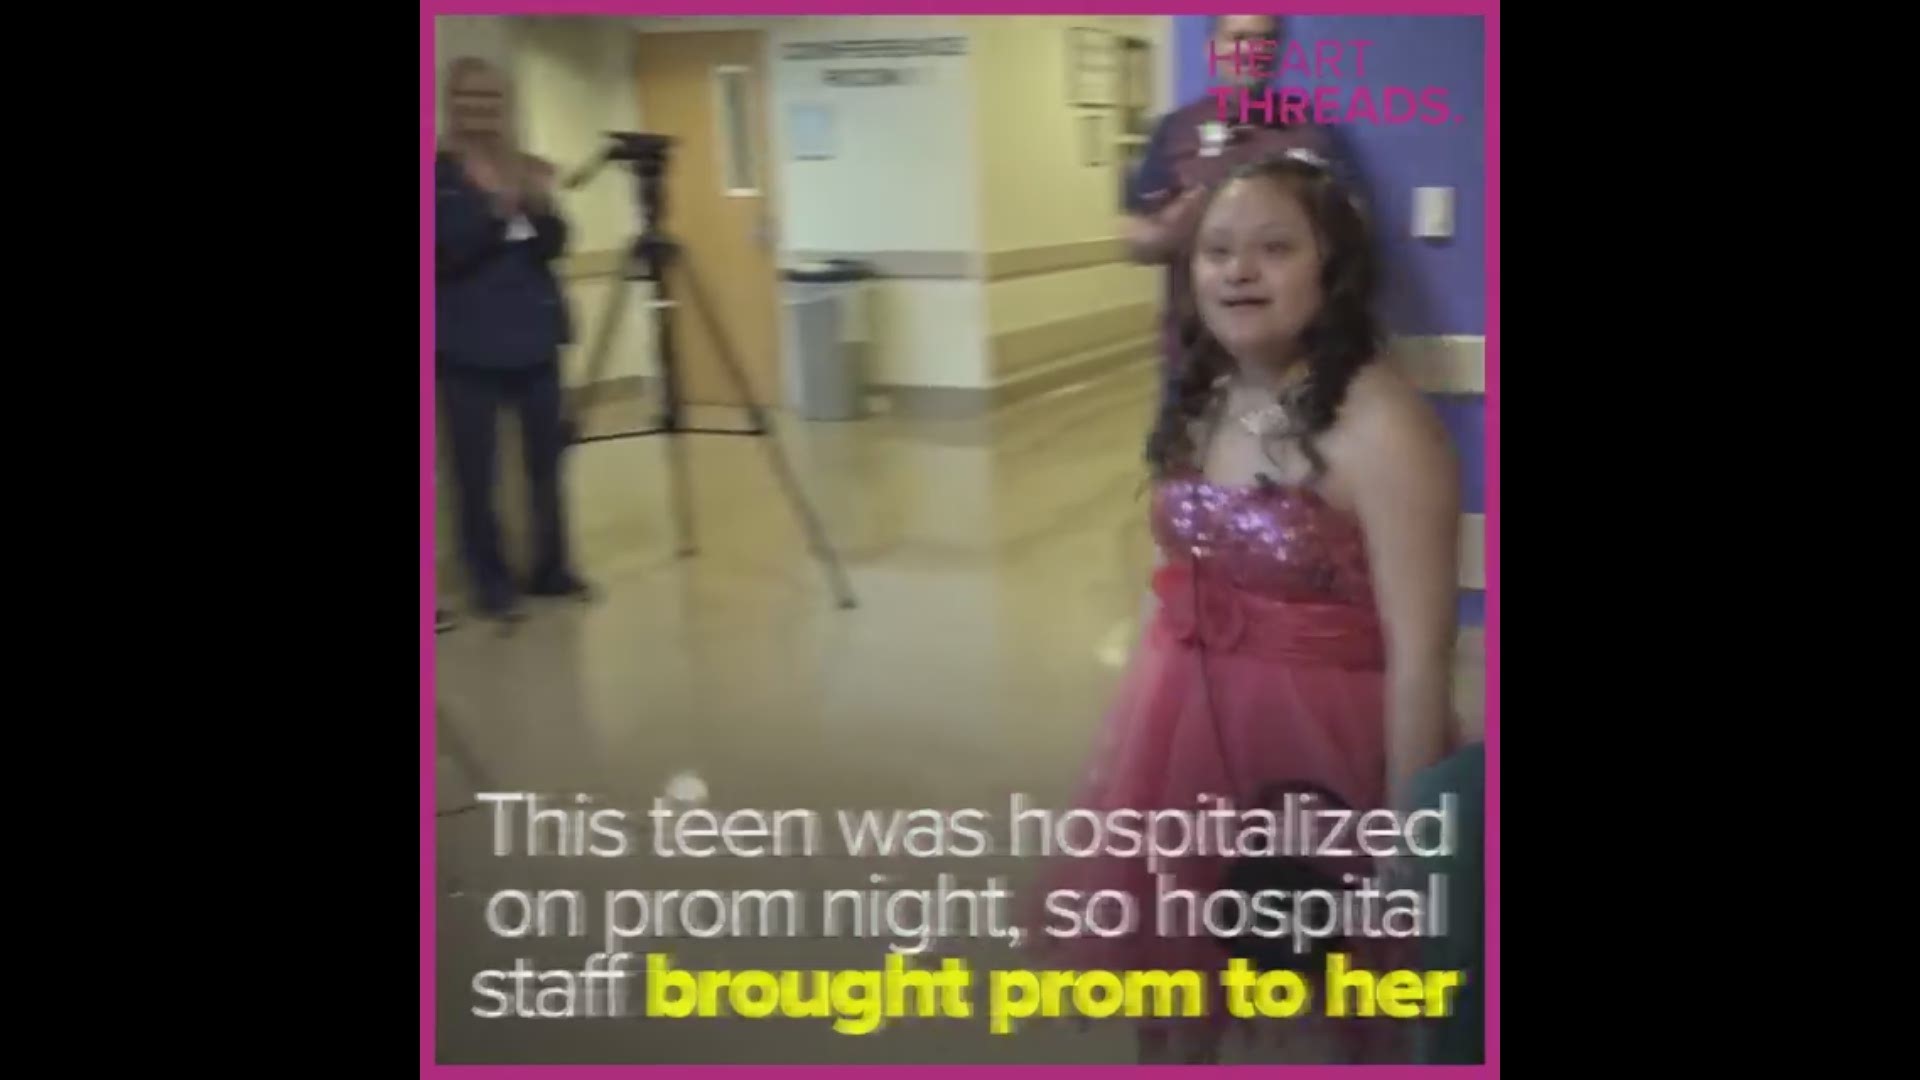 Alexza has Down syndrome and needed an unexpected trip to the hospital, which ruined her much anticipated prom plans. So her friends and hospital staff worked together to make sure Alexza got her prom.